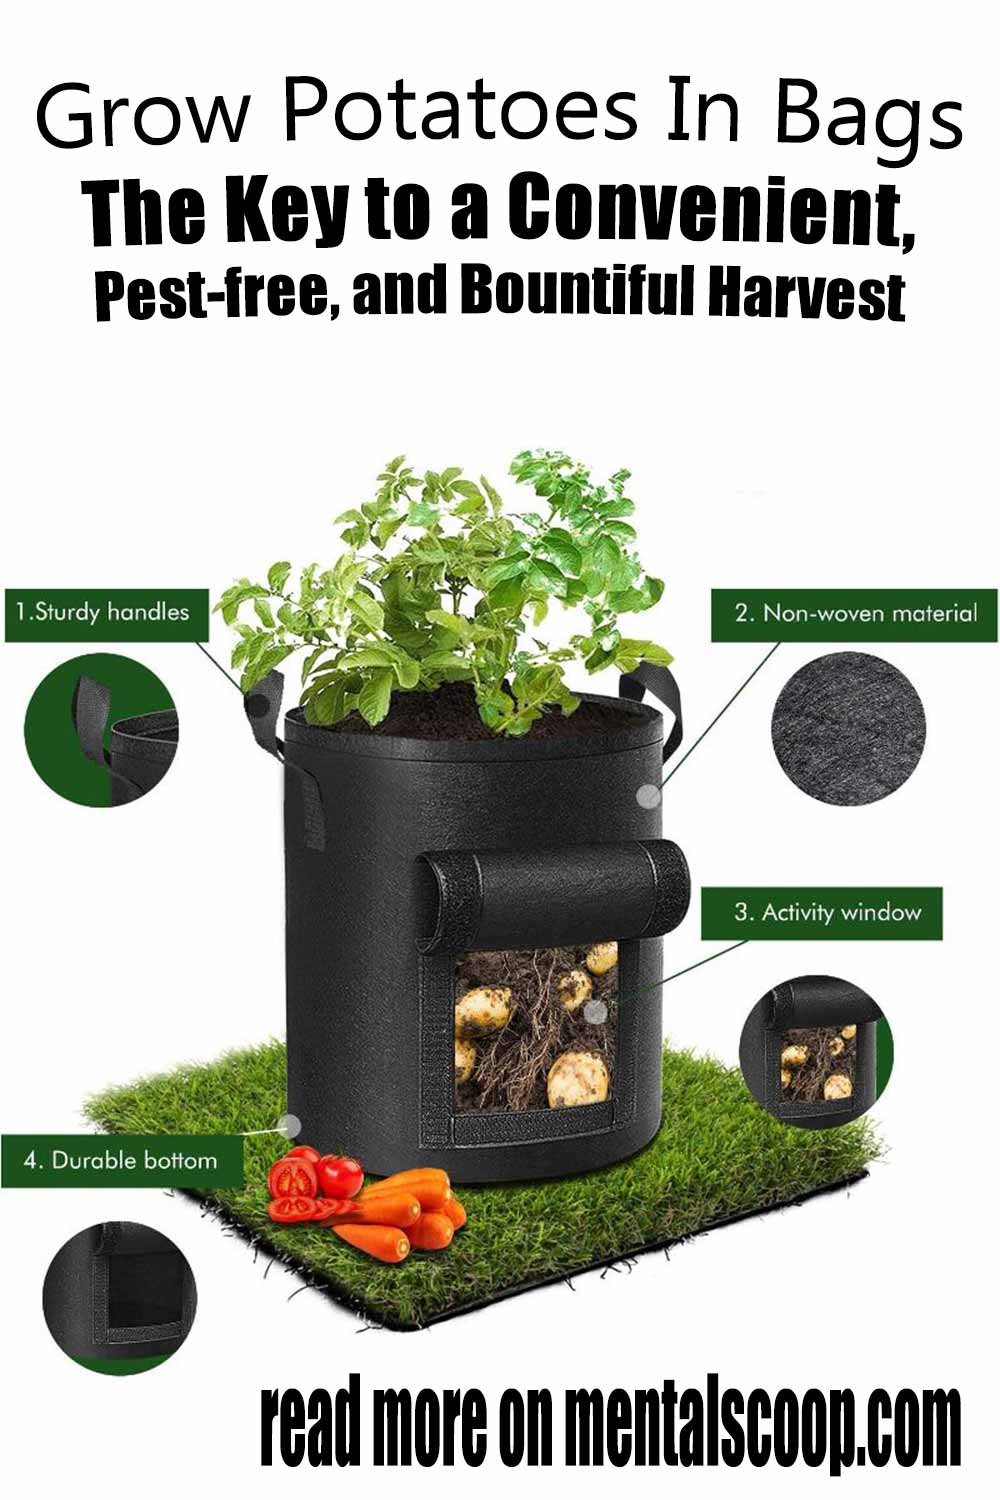 Potato Grow Bags: The Key to a Convenient, Pest-free, and